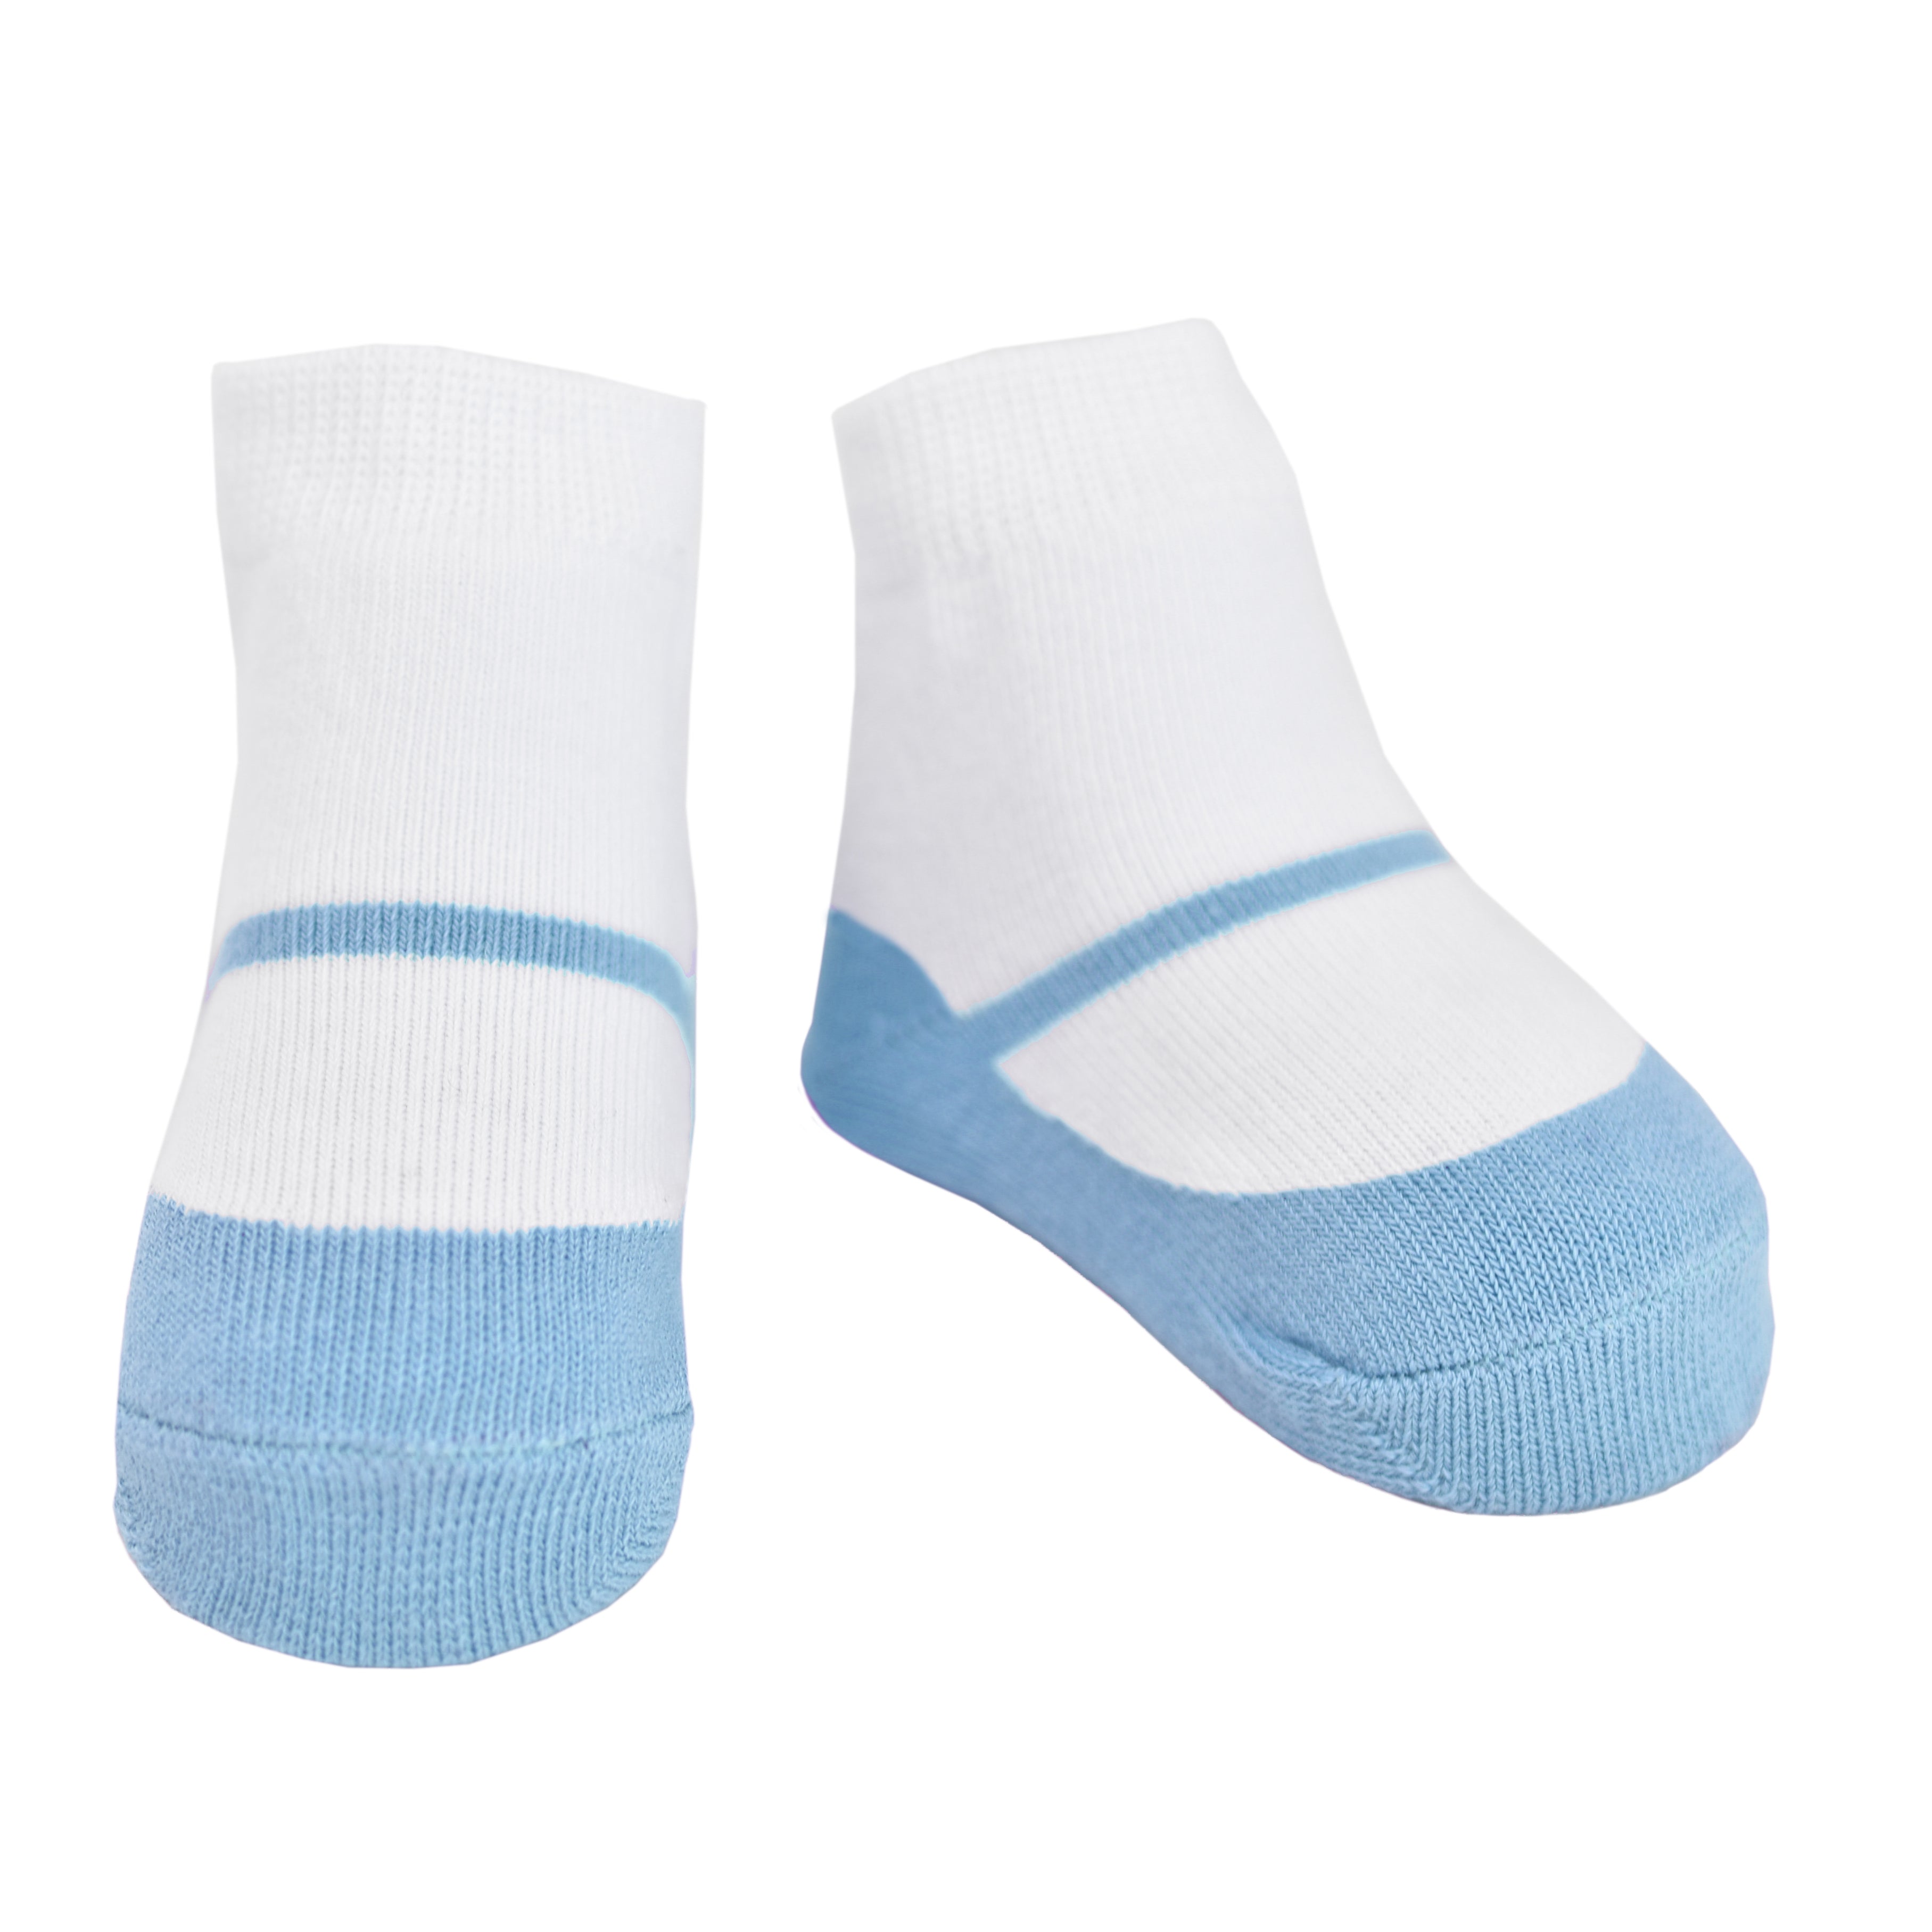 Blue Mary Jane socks that look like shoes baby shower gift